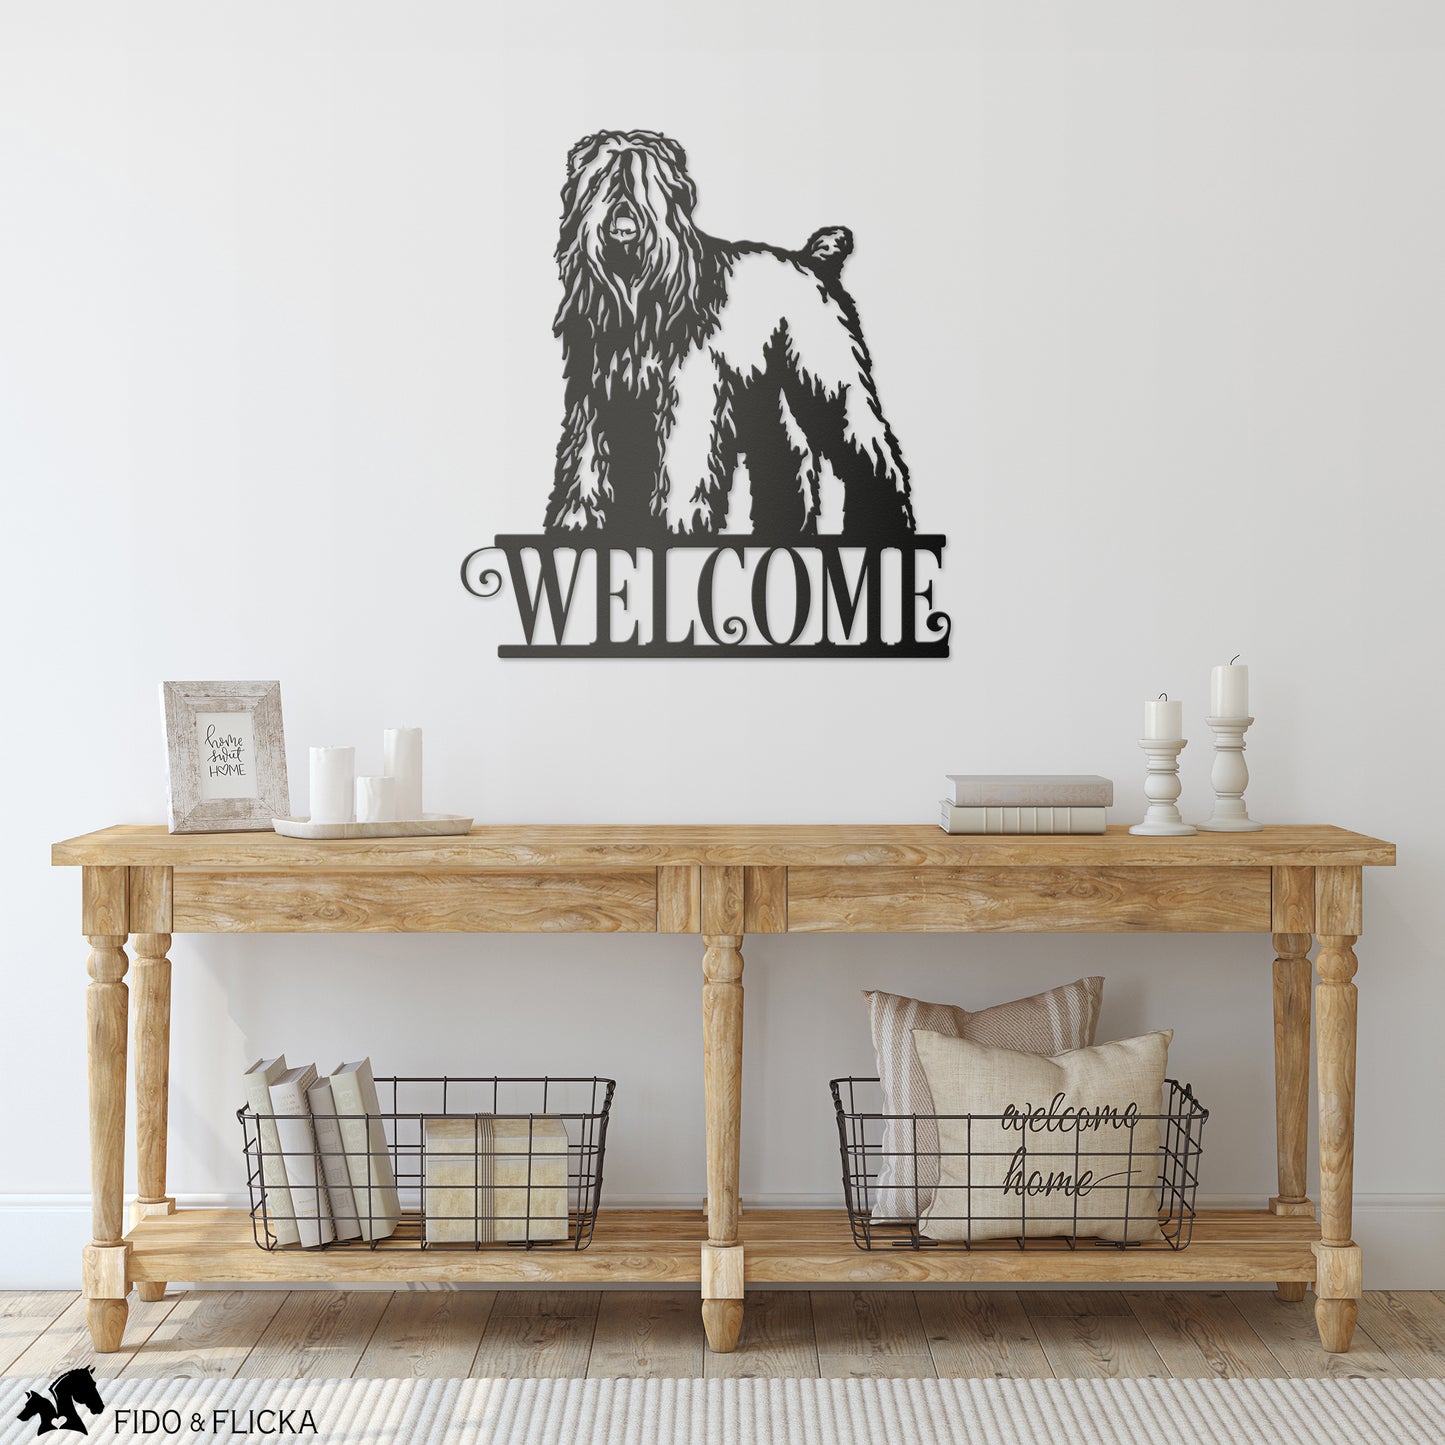 Black Russian Terrier Welcome metal sign in entry way